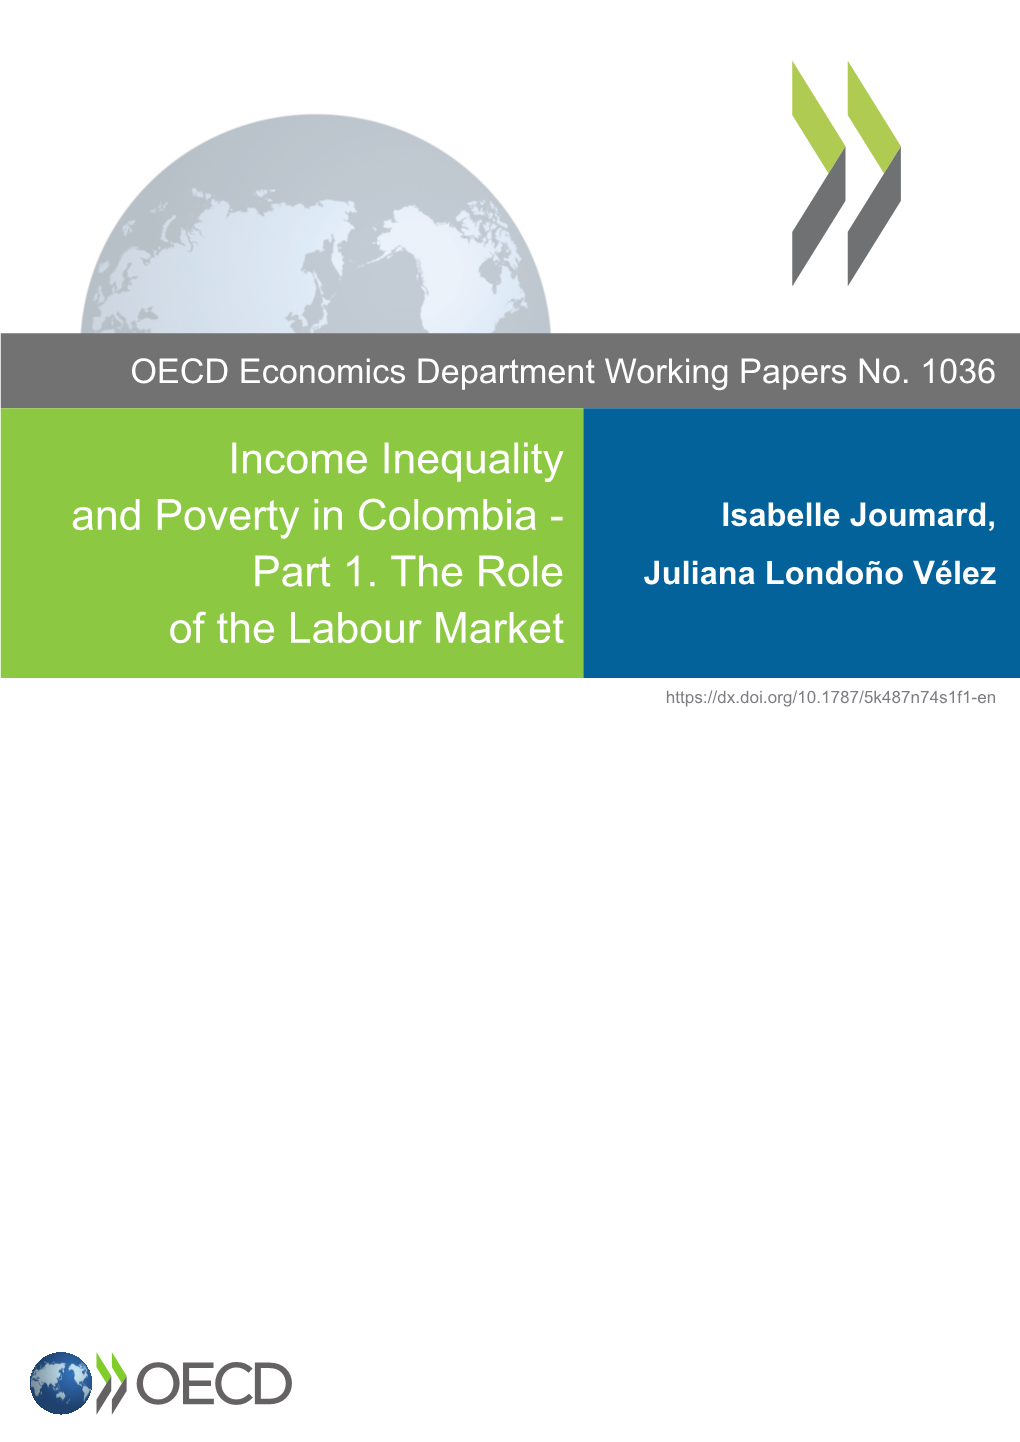 Income Inequality and Poverty in Colombia - Isabelle Joumard, Part 1